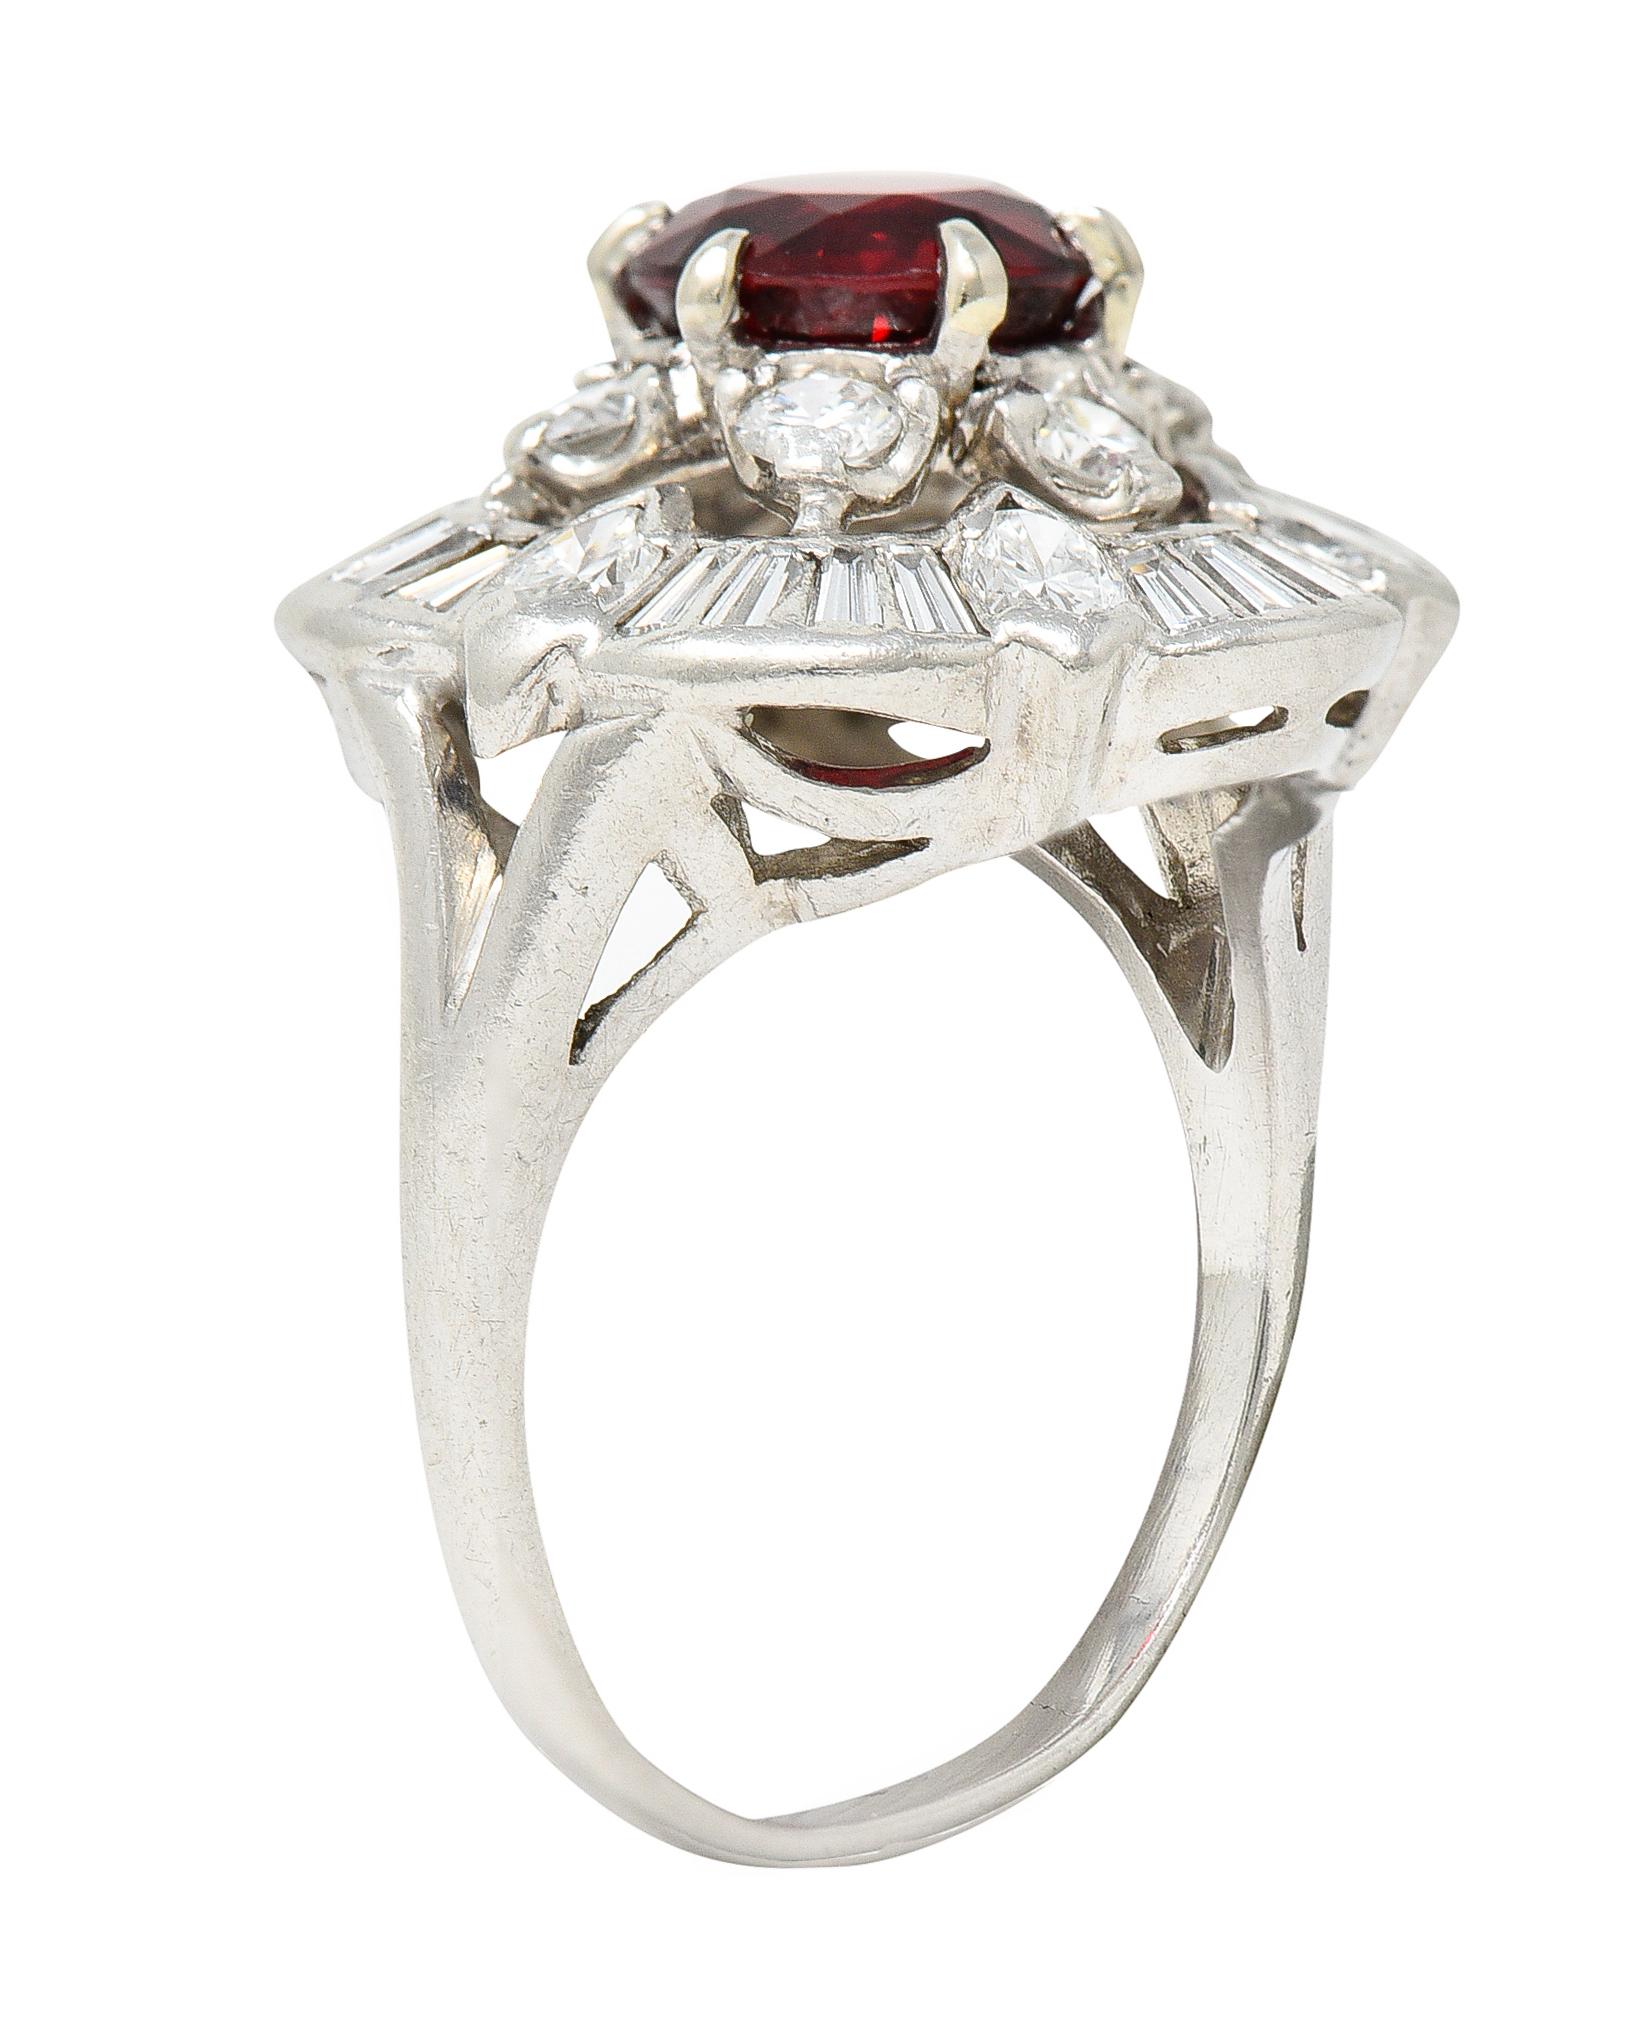 Centering a round cut spinel weighing 1.52 carats - natural and vividly red in color. Surrounded by a double halo of diamonds. Inner halo is a floral cluster comprised of round brilliant cut diamonds. Outer halo is comprised of flush set baguette